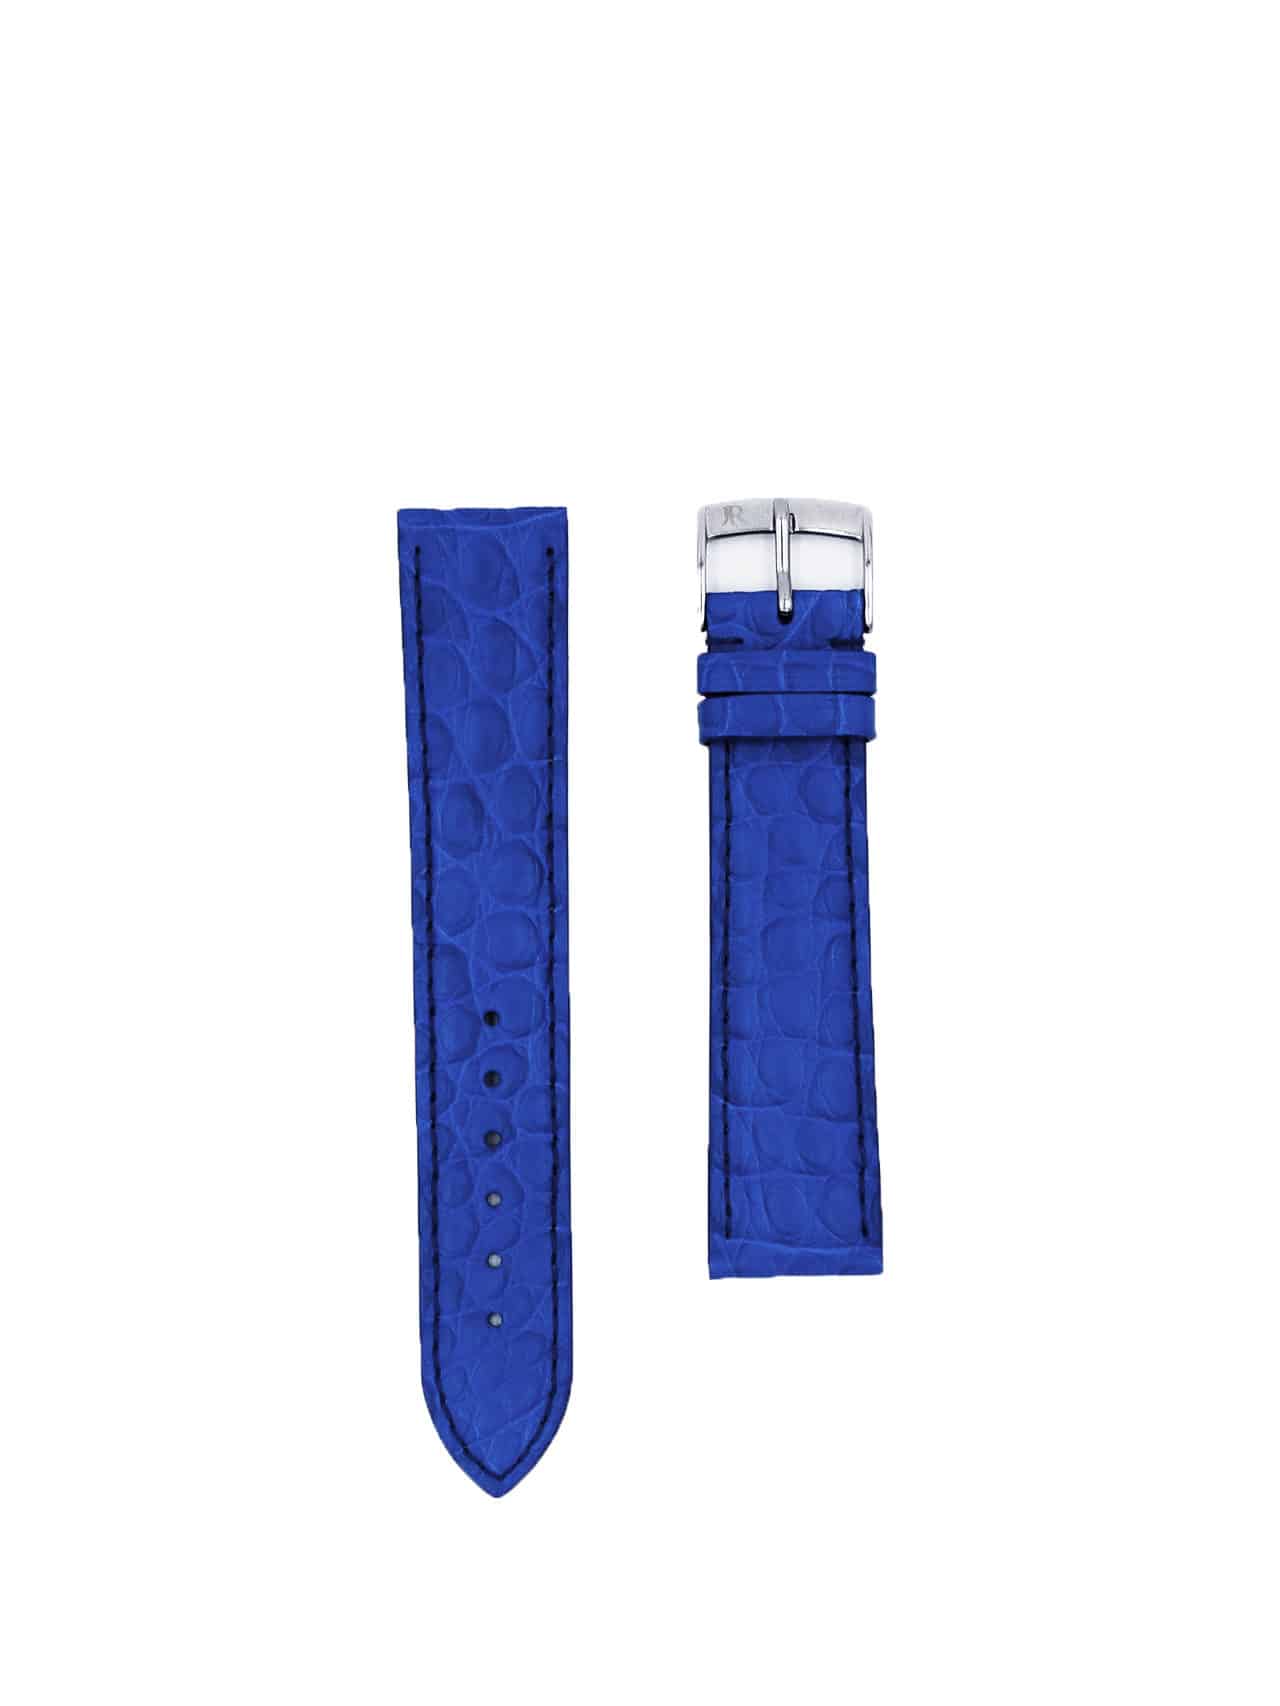 watch strap leather 20mm